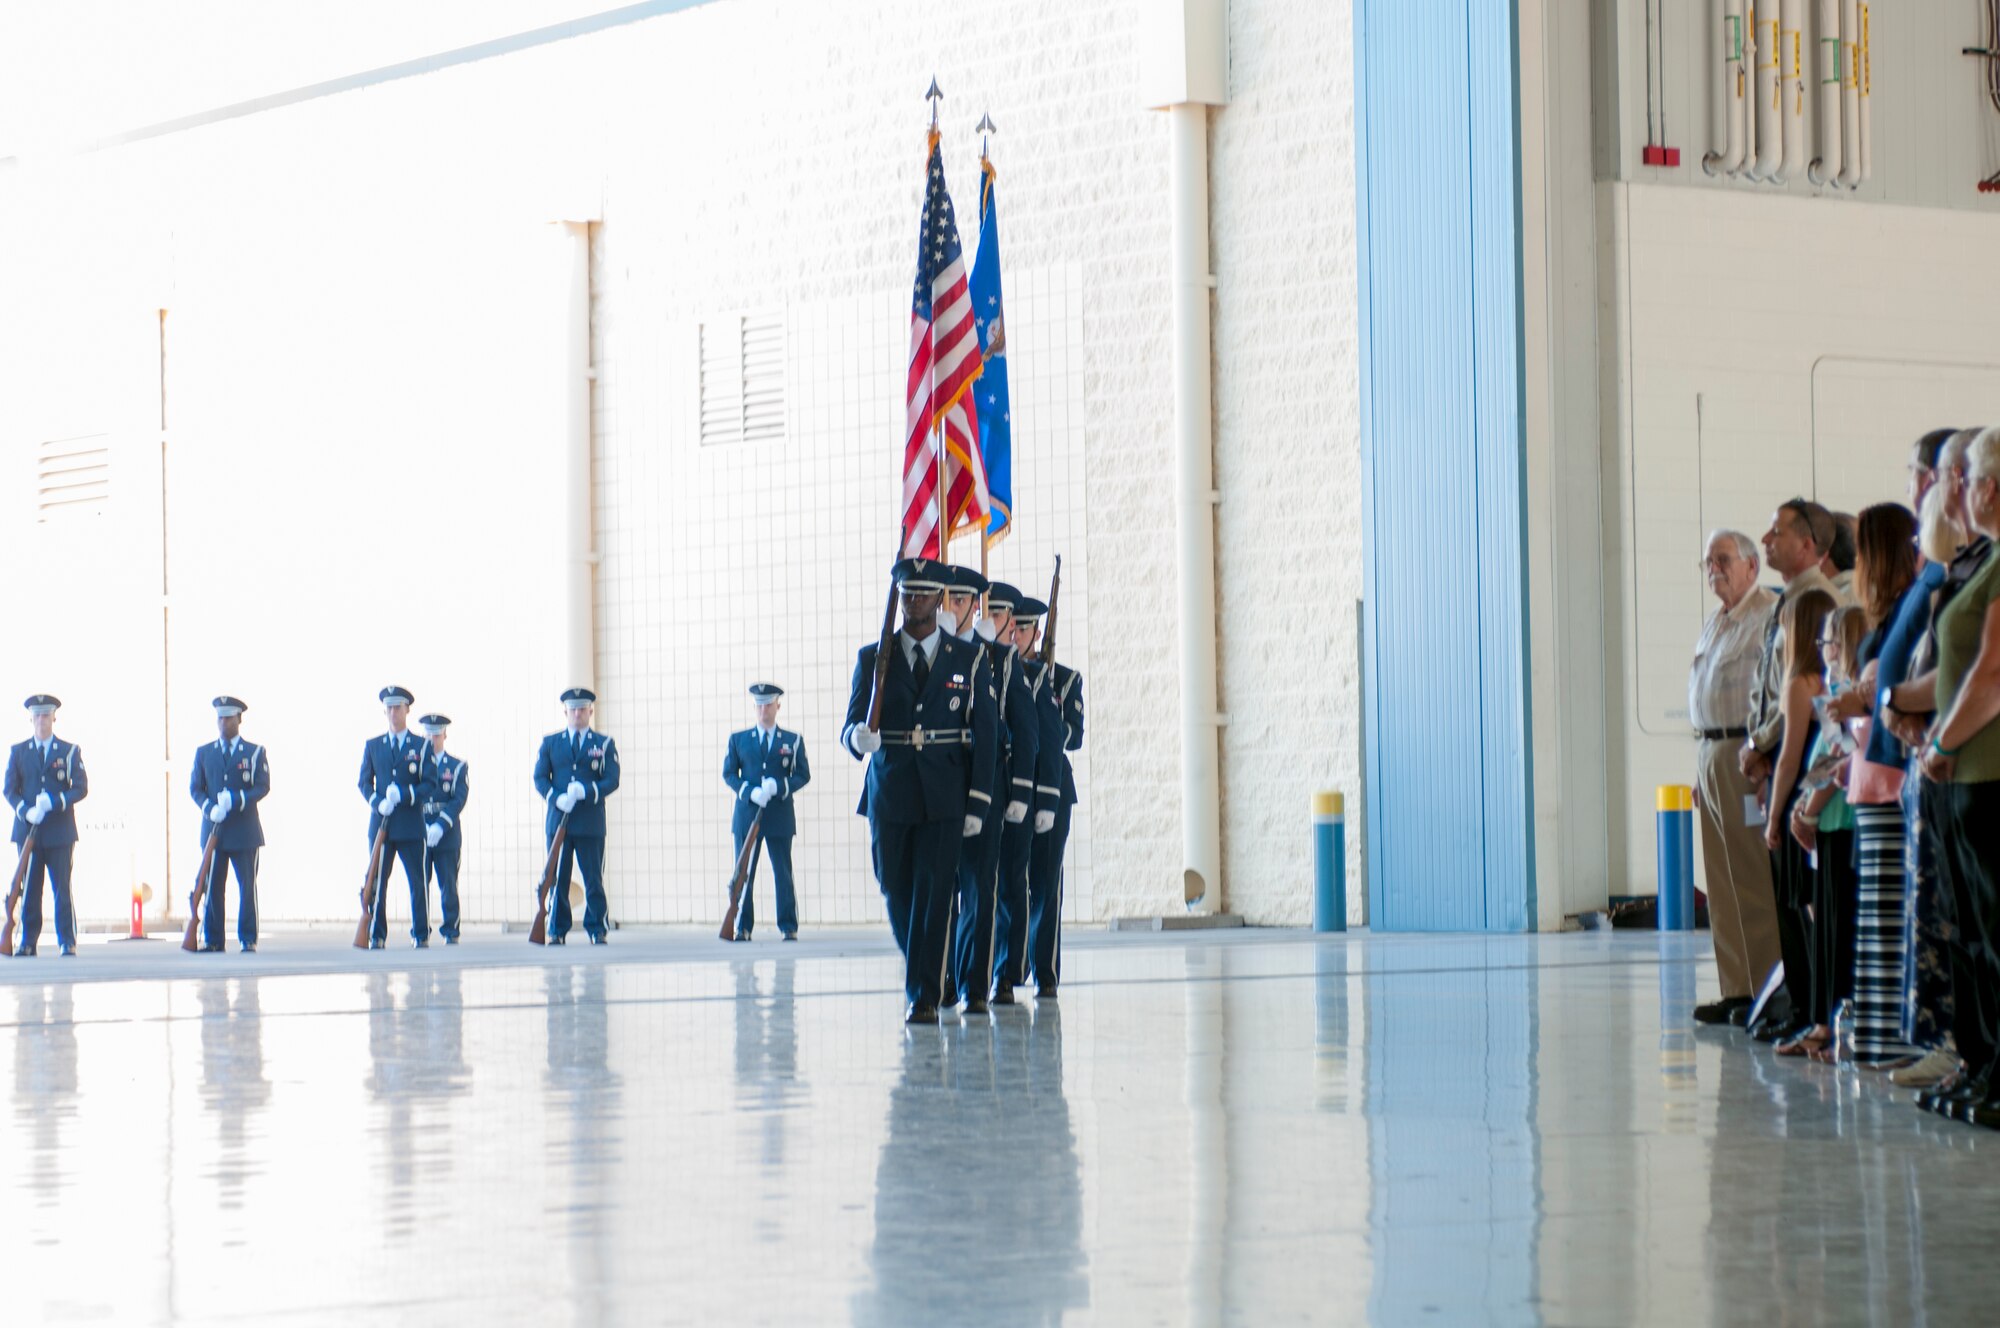 The Arizona Air National Guard’s 162nd Wing and Davis-Monthan Air Force Base honor guard present the colors during a ceremony at Tucson International Airport October 14.  The ceremony honored the life and memory of the unit’s first and longest serving commander retired Maj. Gen. Donald E. Morris who died June 7, 2016. (U.S. Air National Guard photo by 1st Lt. Lacey Roberts)